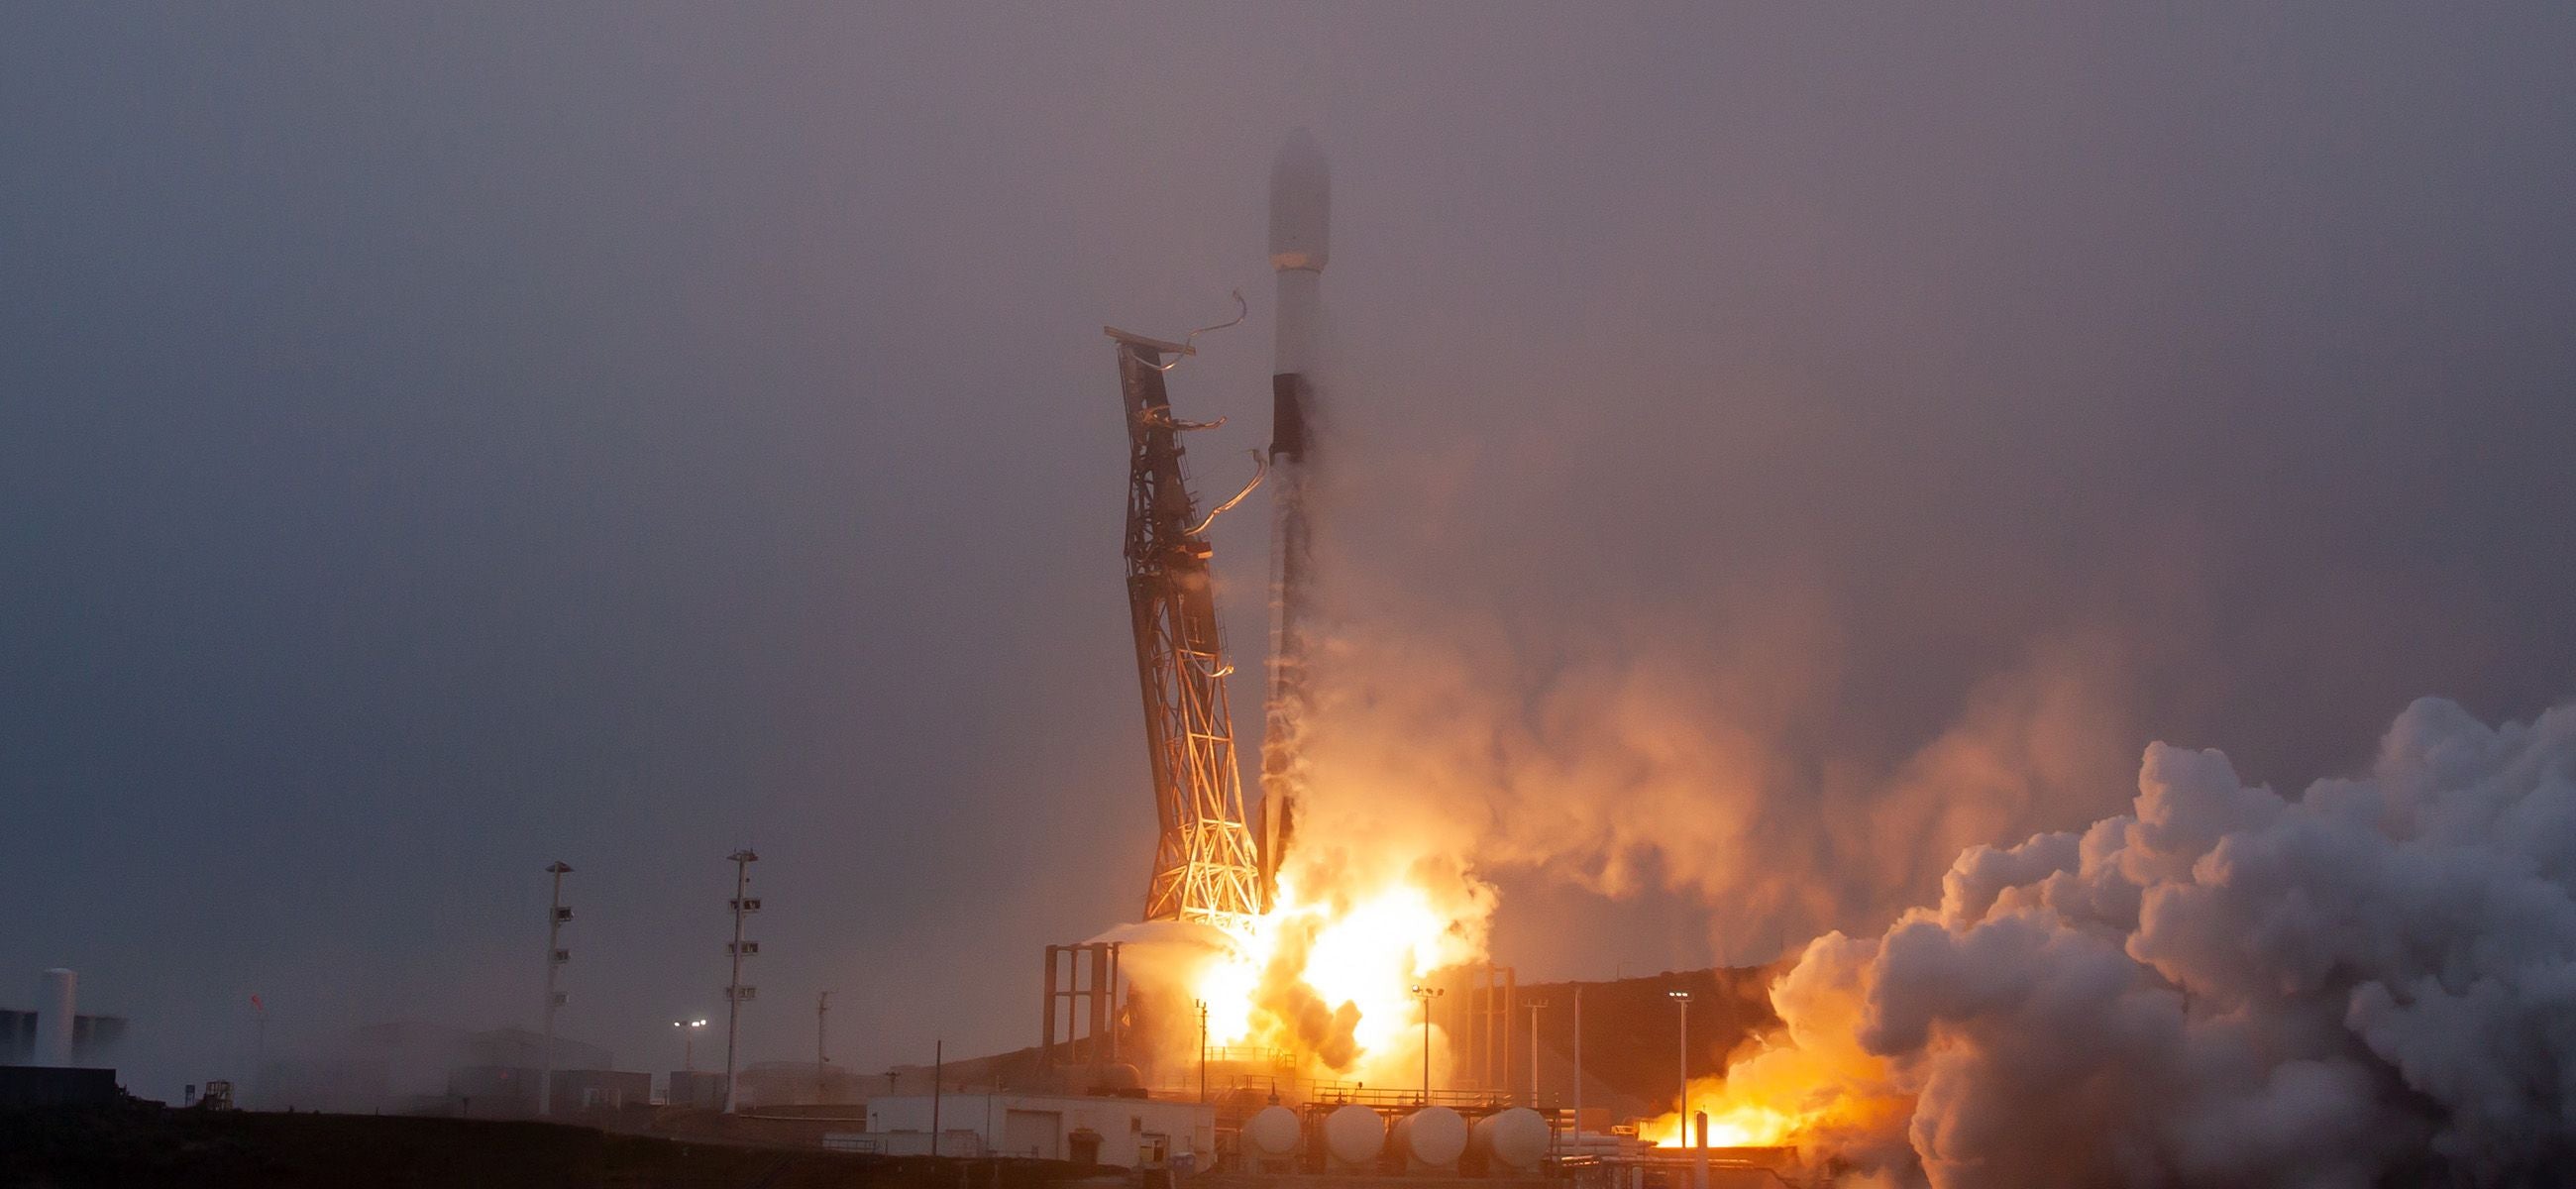 SpaceX launches the Space Development Agency Tranche 0 mission carrying U.S. military satellites to orbit